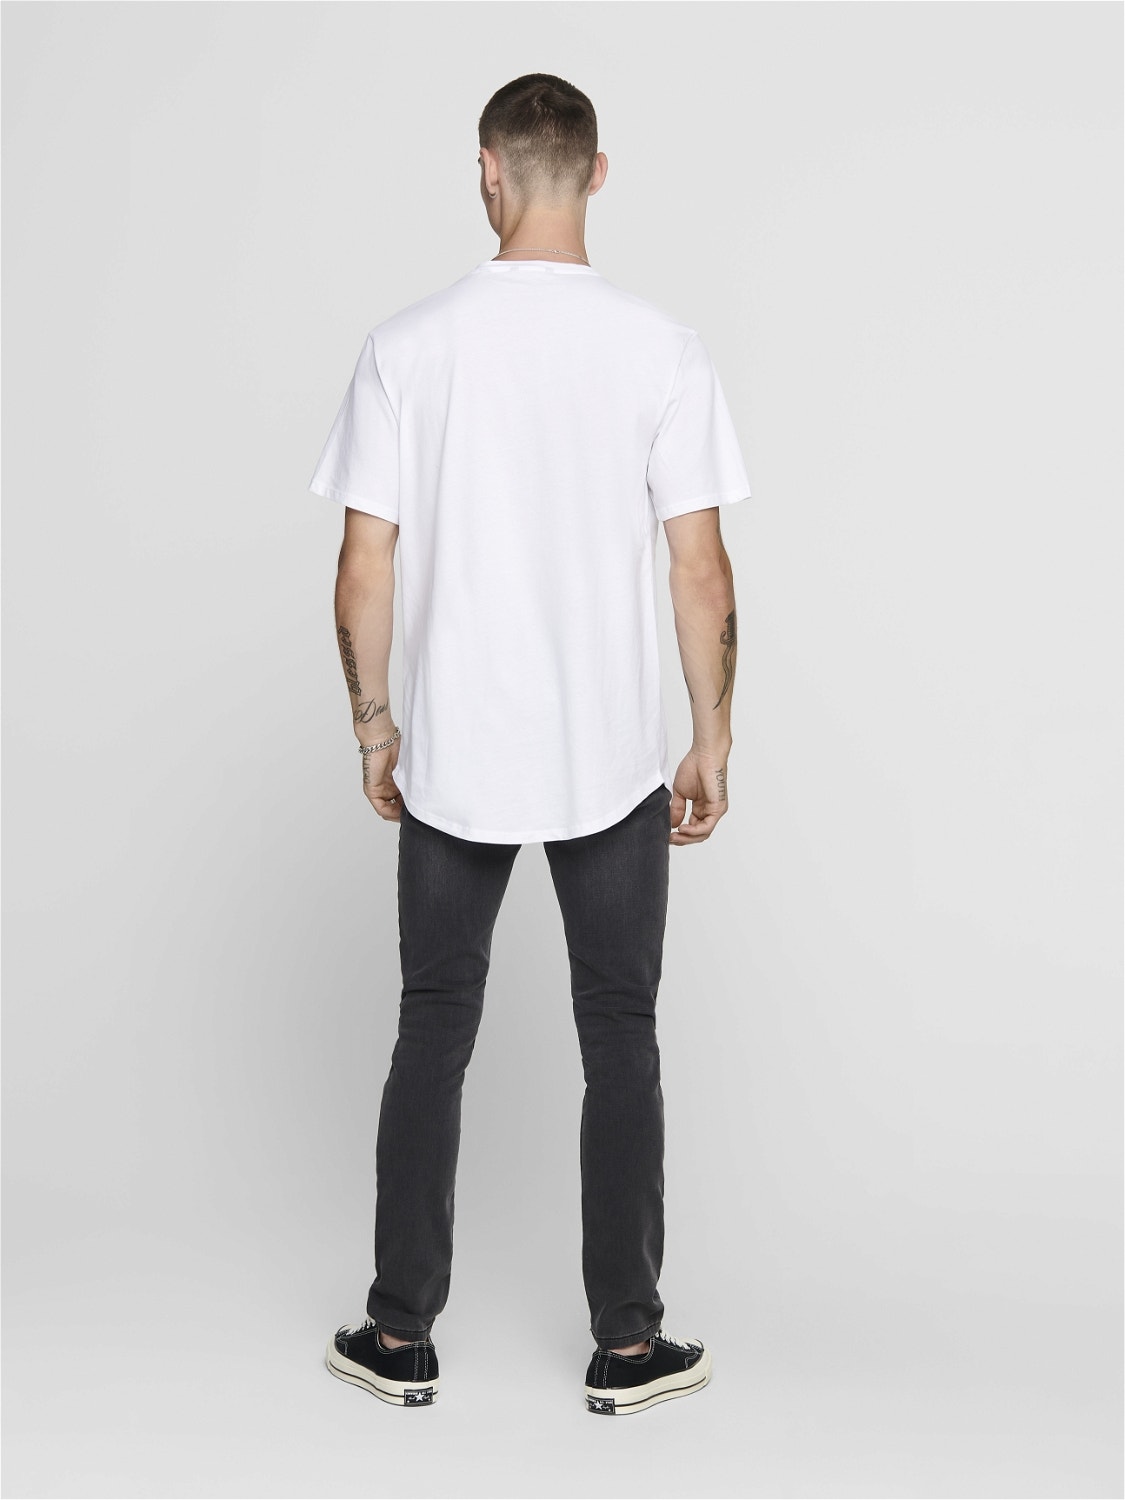 ONLY & SONS Long Line Fit Round Neck T-Shirt -White - 22002973